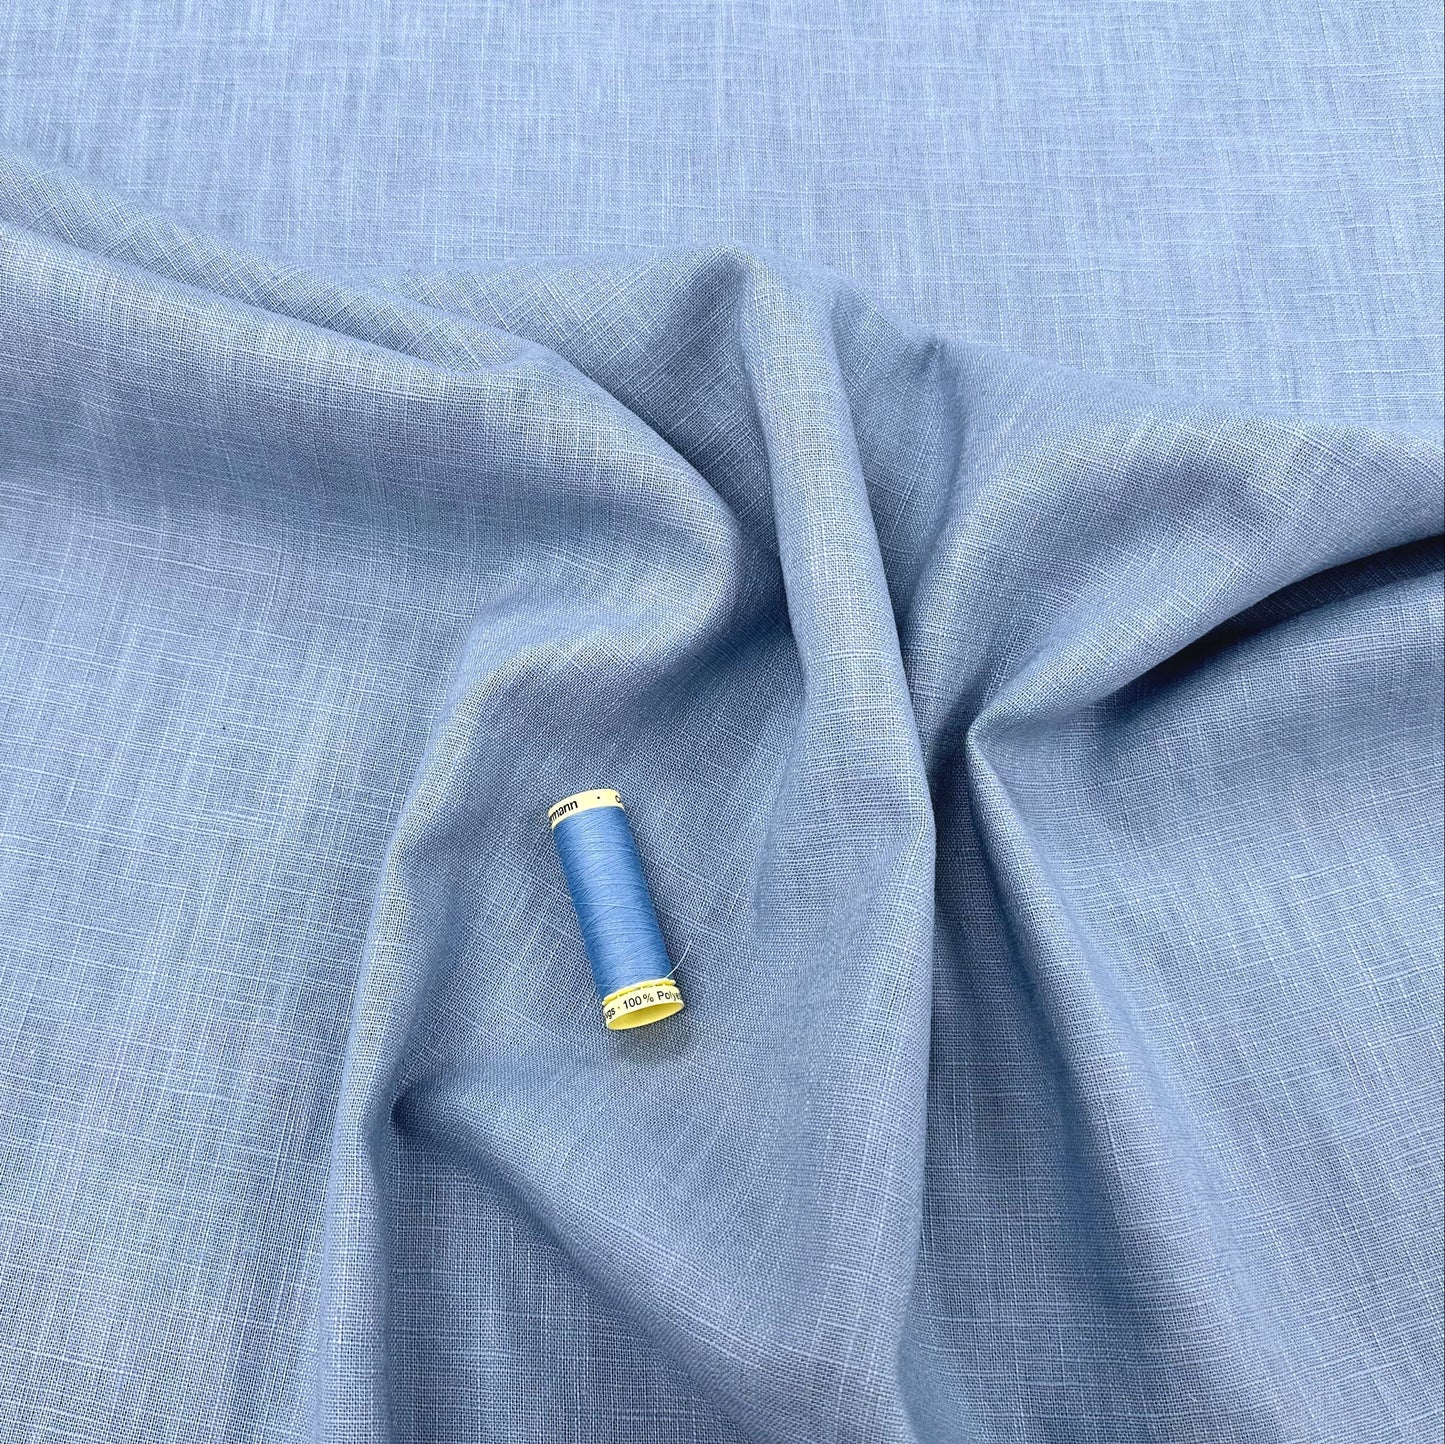 Washed Linen - Blue Shadow